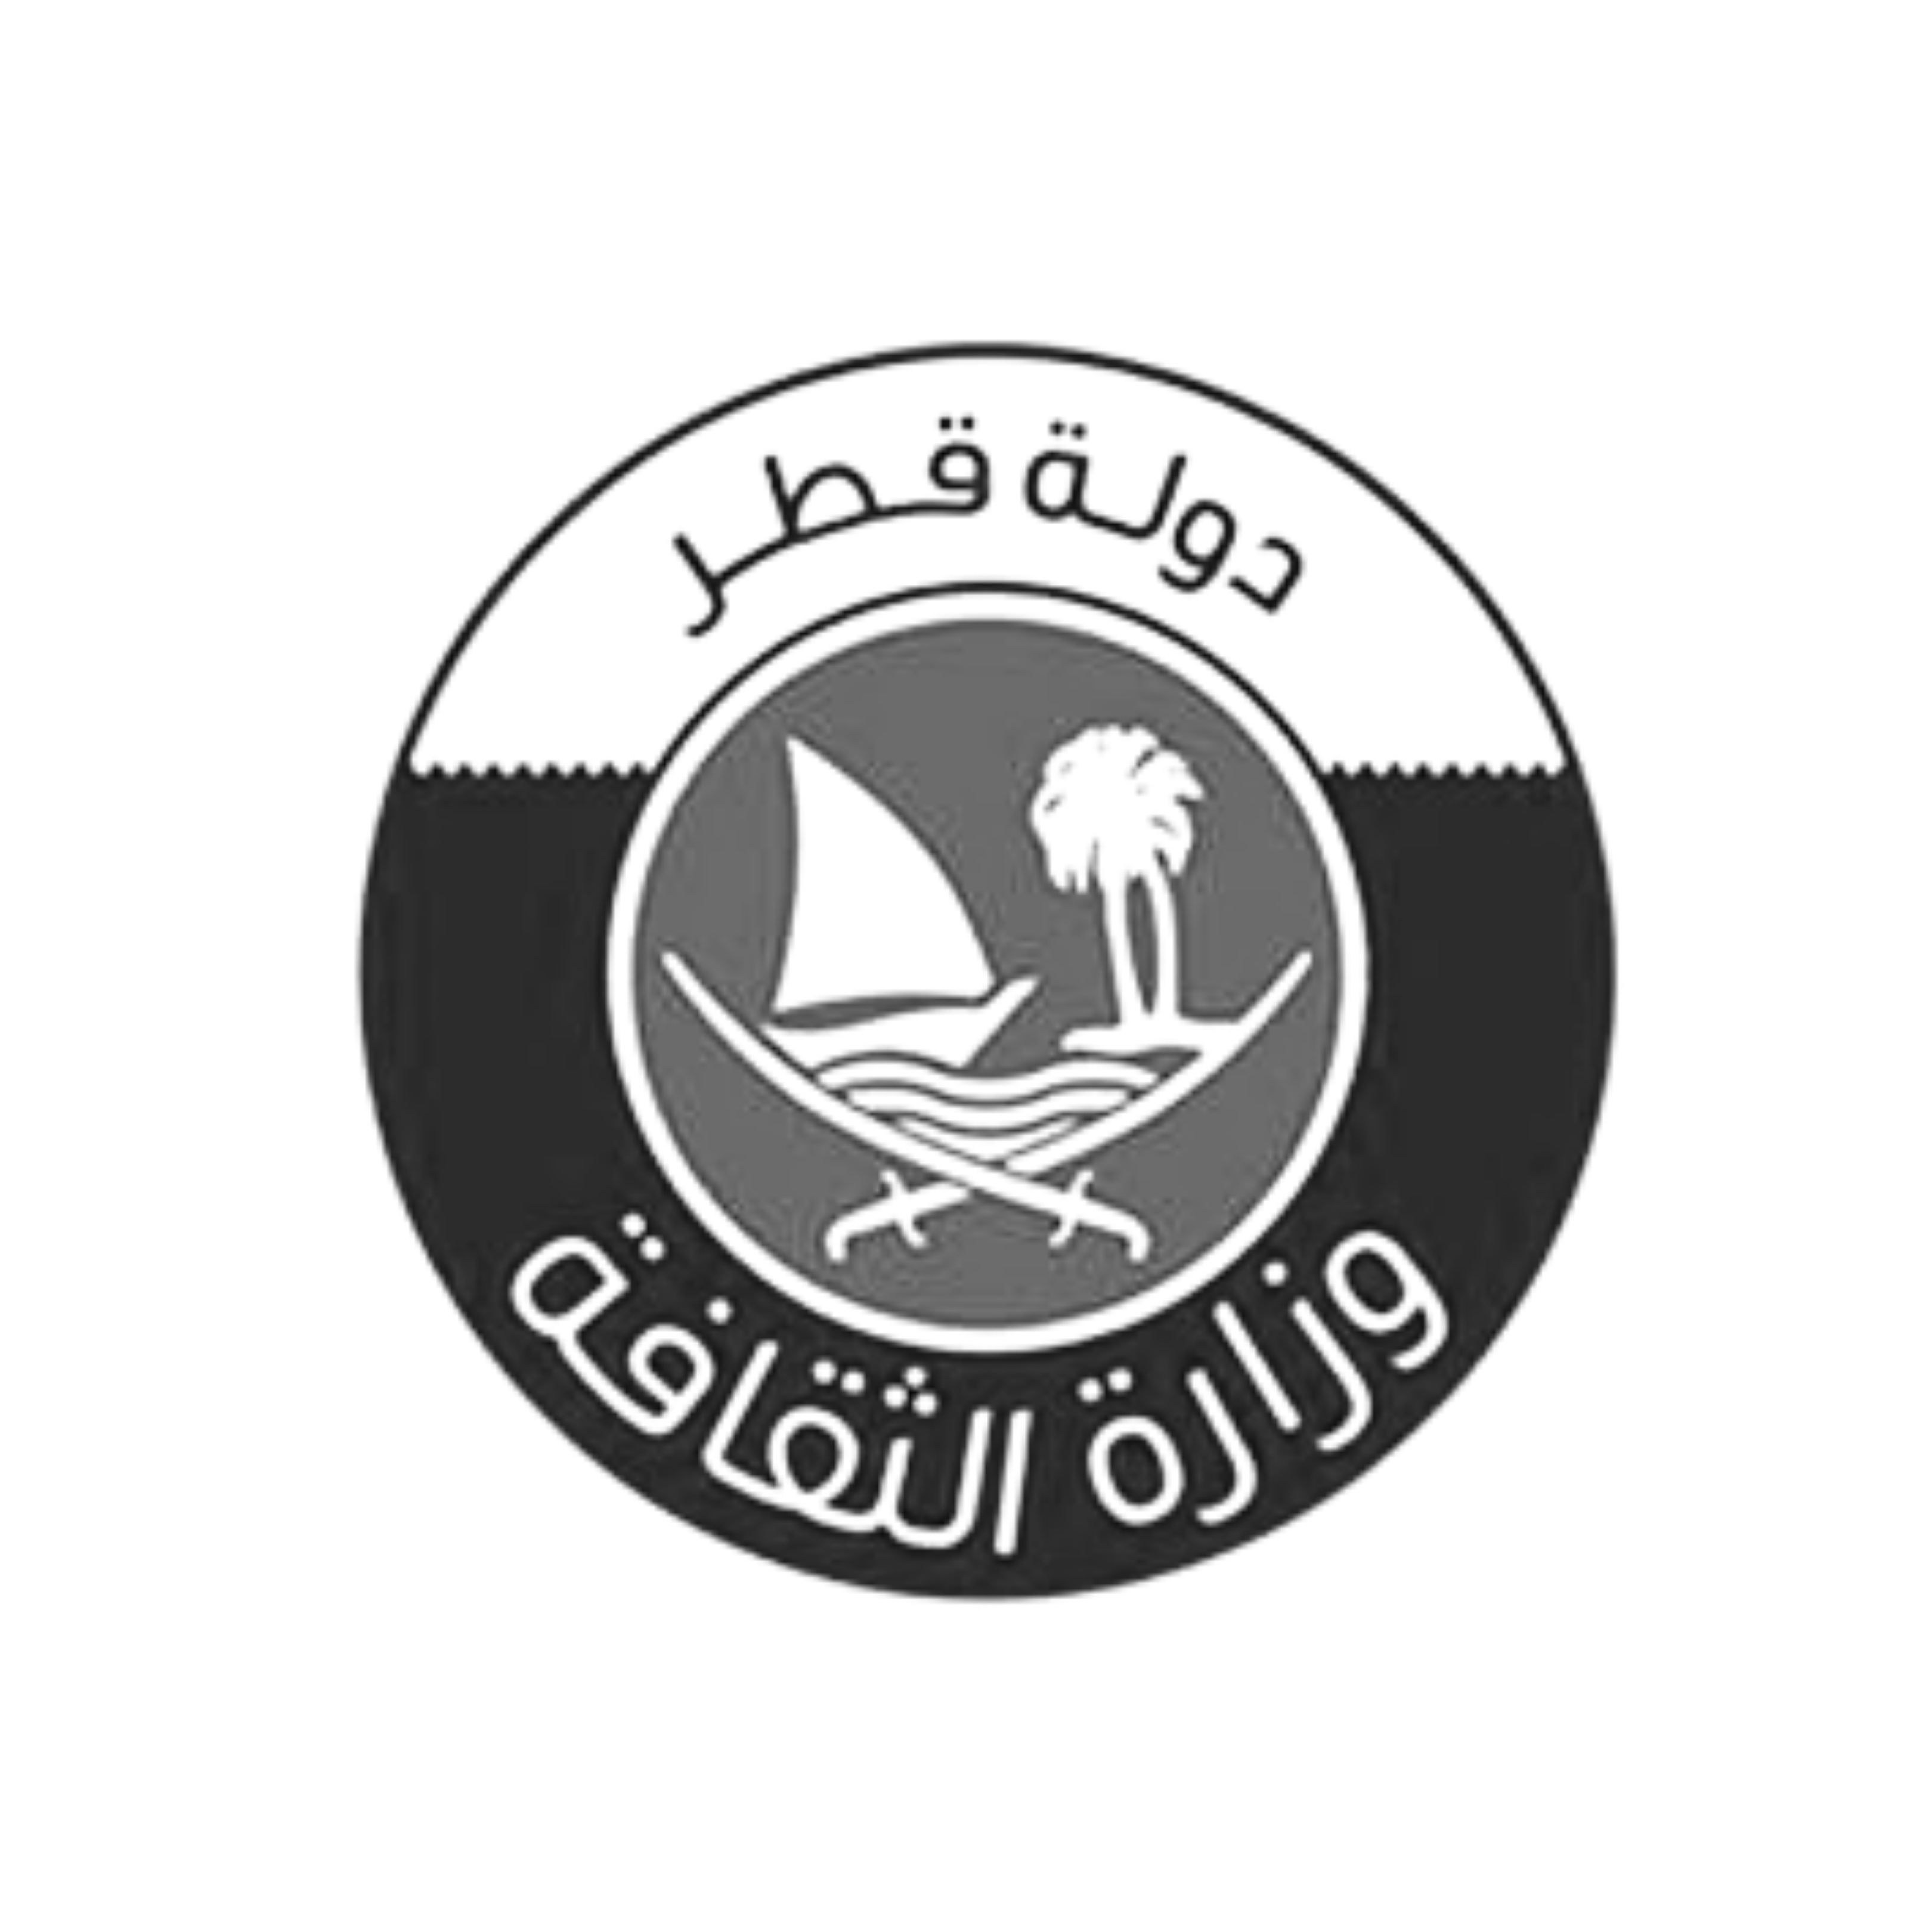 Ministry of Culture Logo with the name written in Arabic in a circle around an image depicting a boat and palm tree.